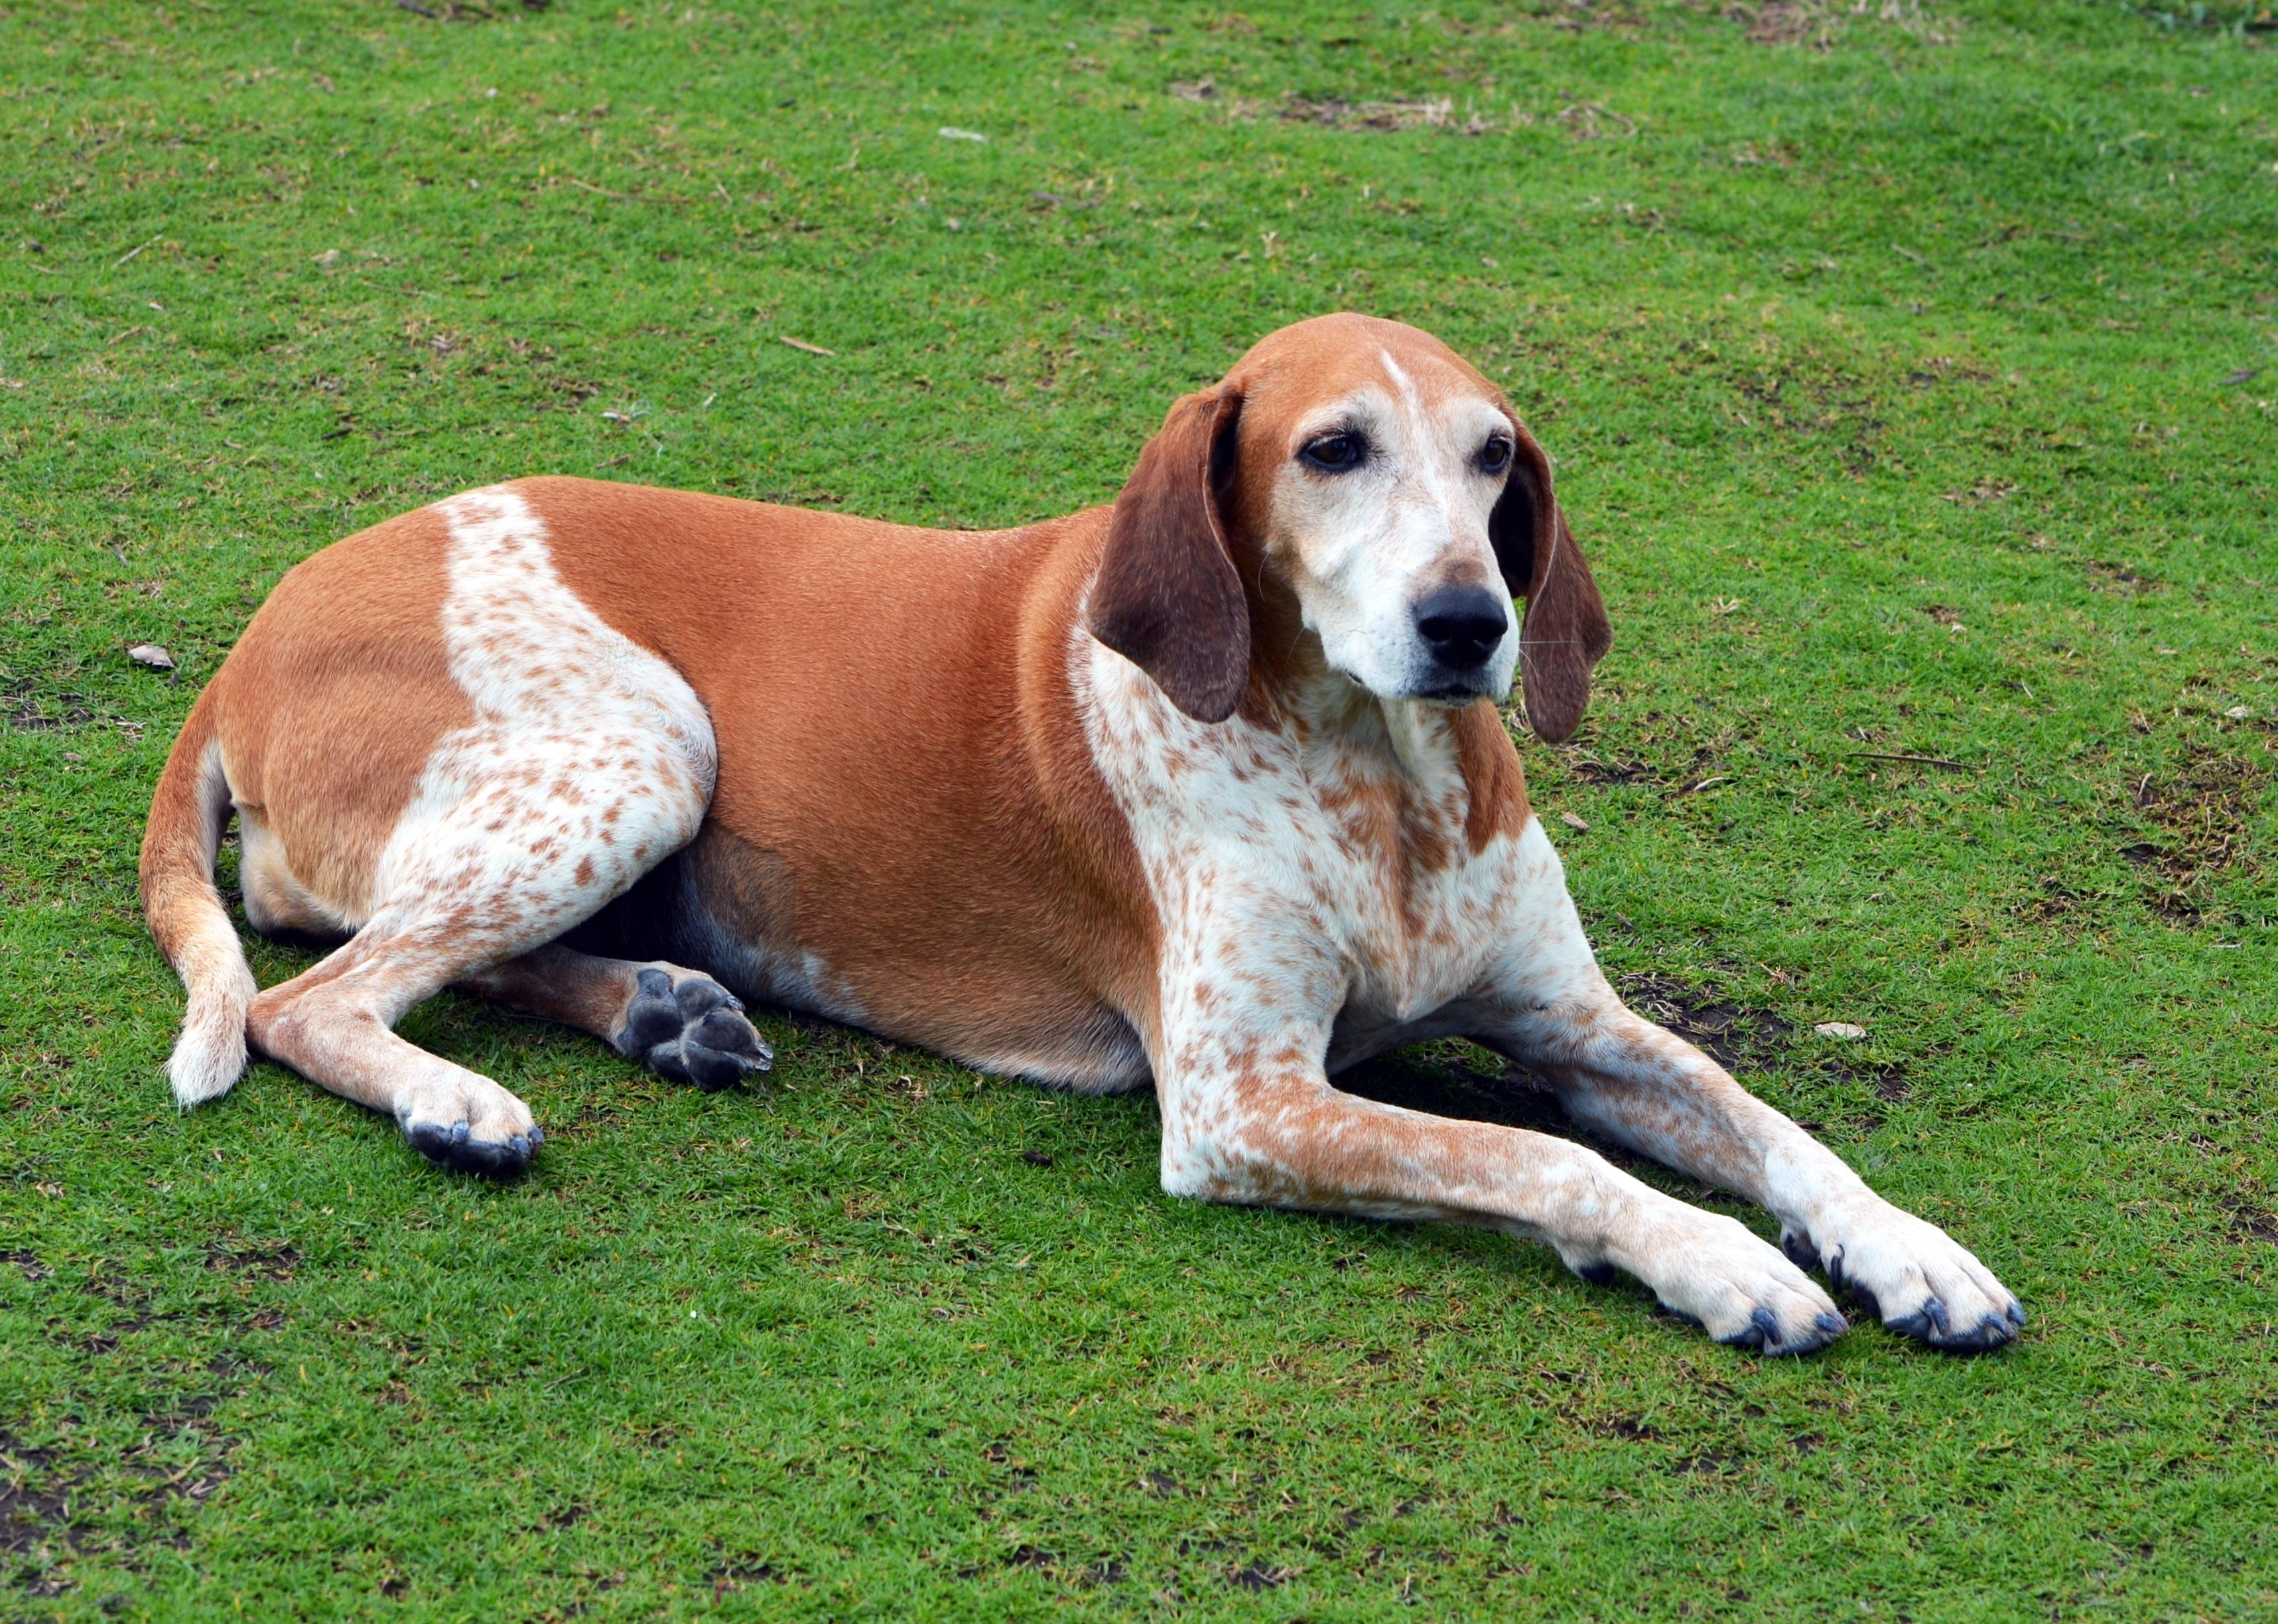 An American English Coonhound laying in grass.